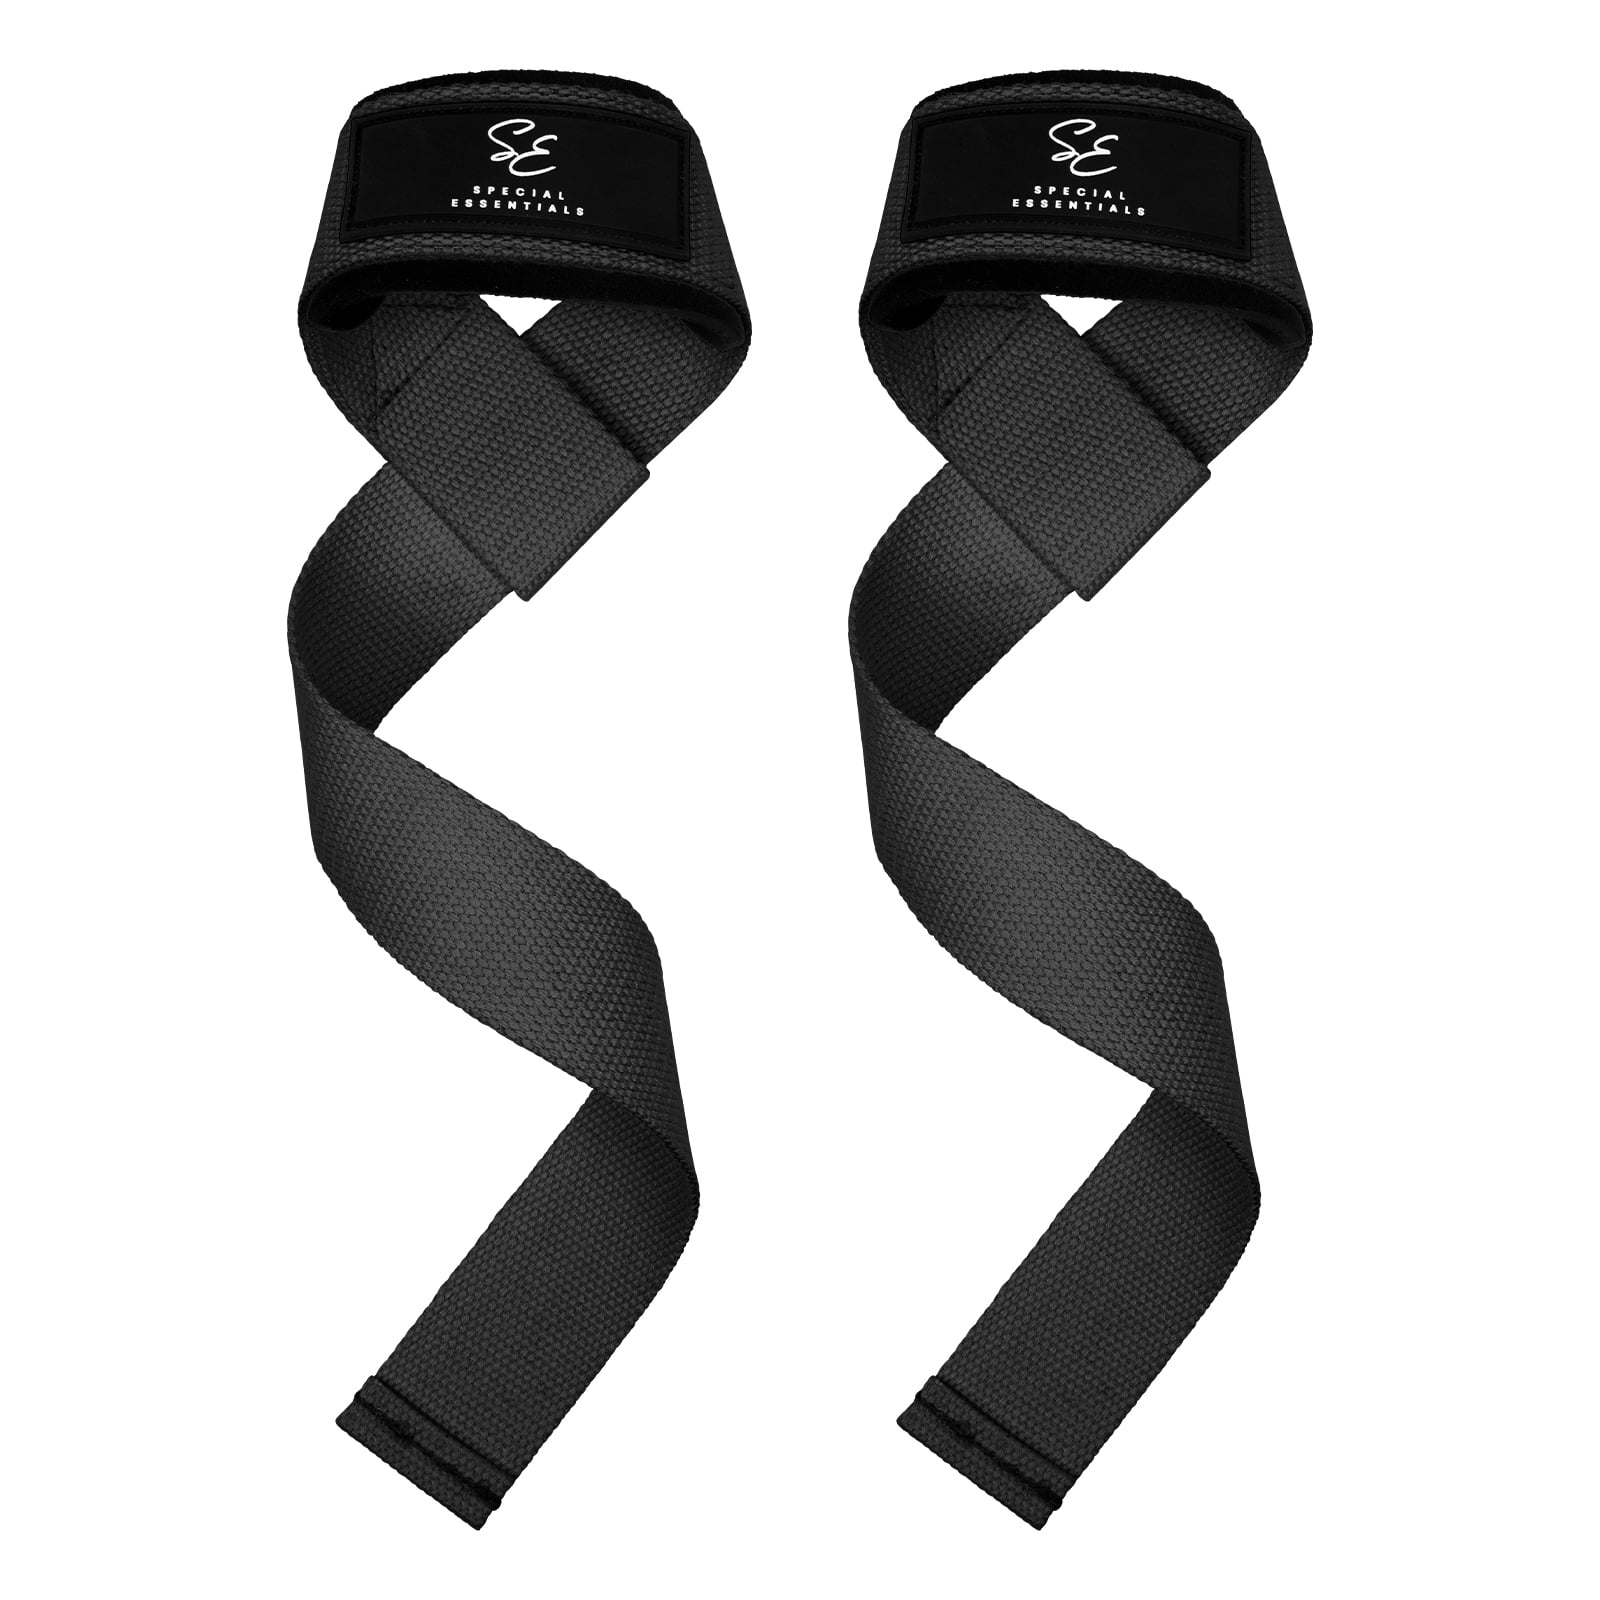 Wrist Wraps + Lifting Straps Bundle (2 Pairs) for Weightlifting